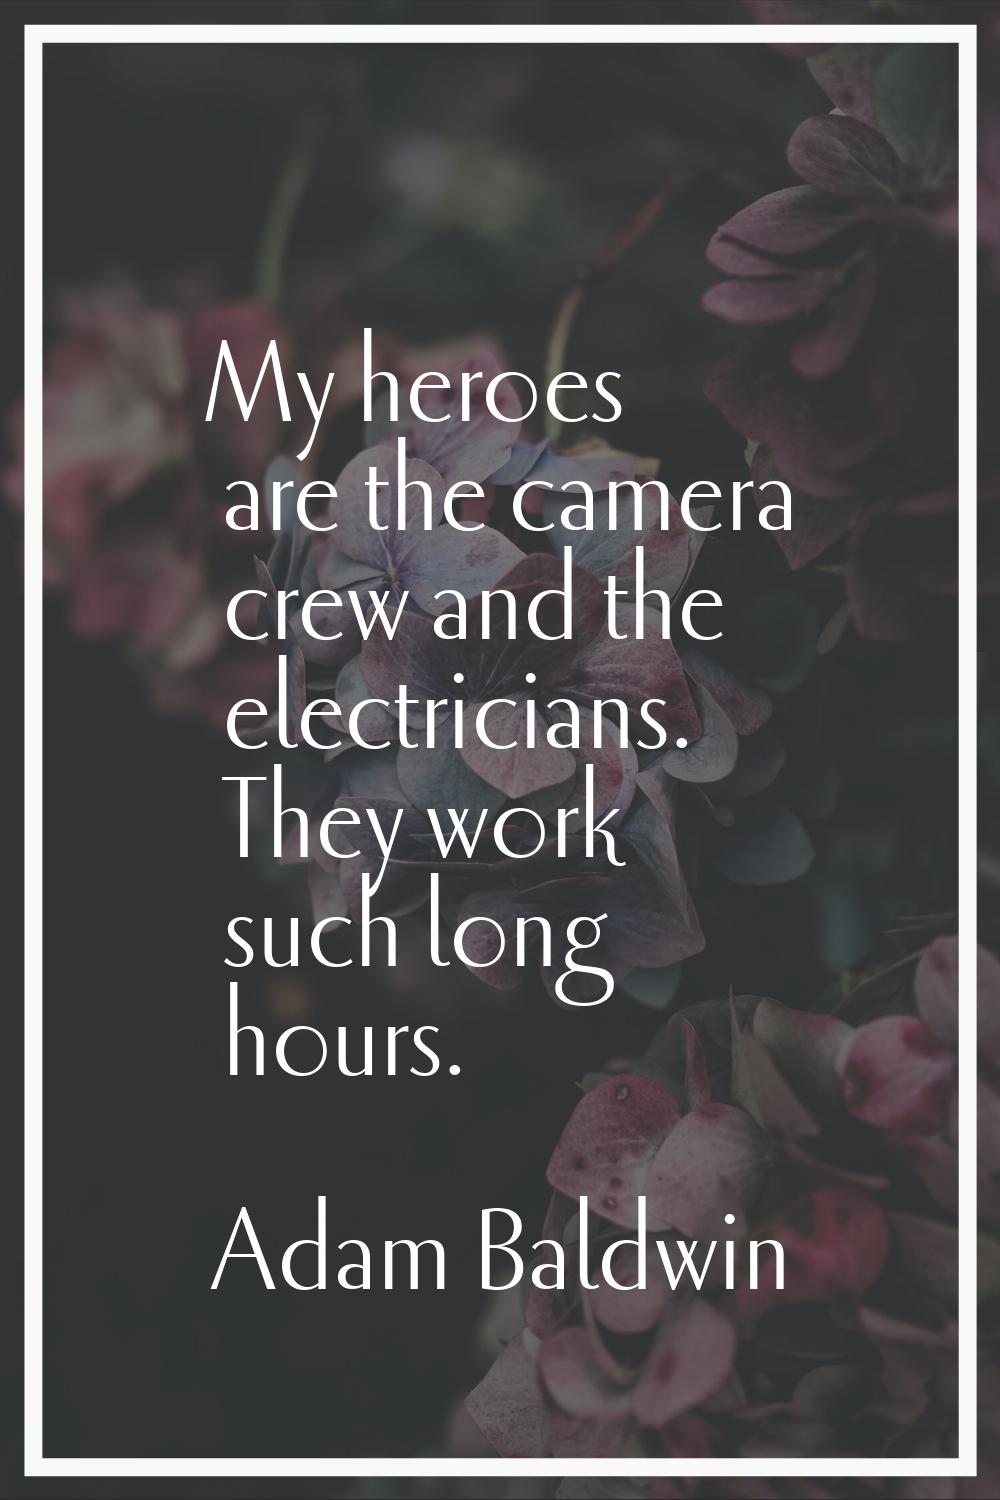 My heroes are the camera crew and the electricians. They work such long hours.